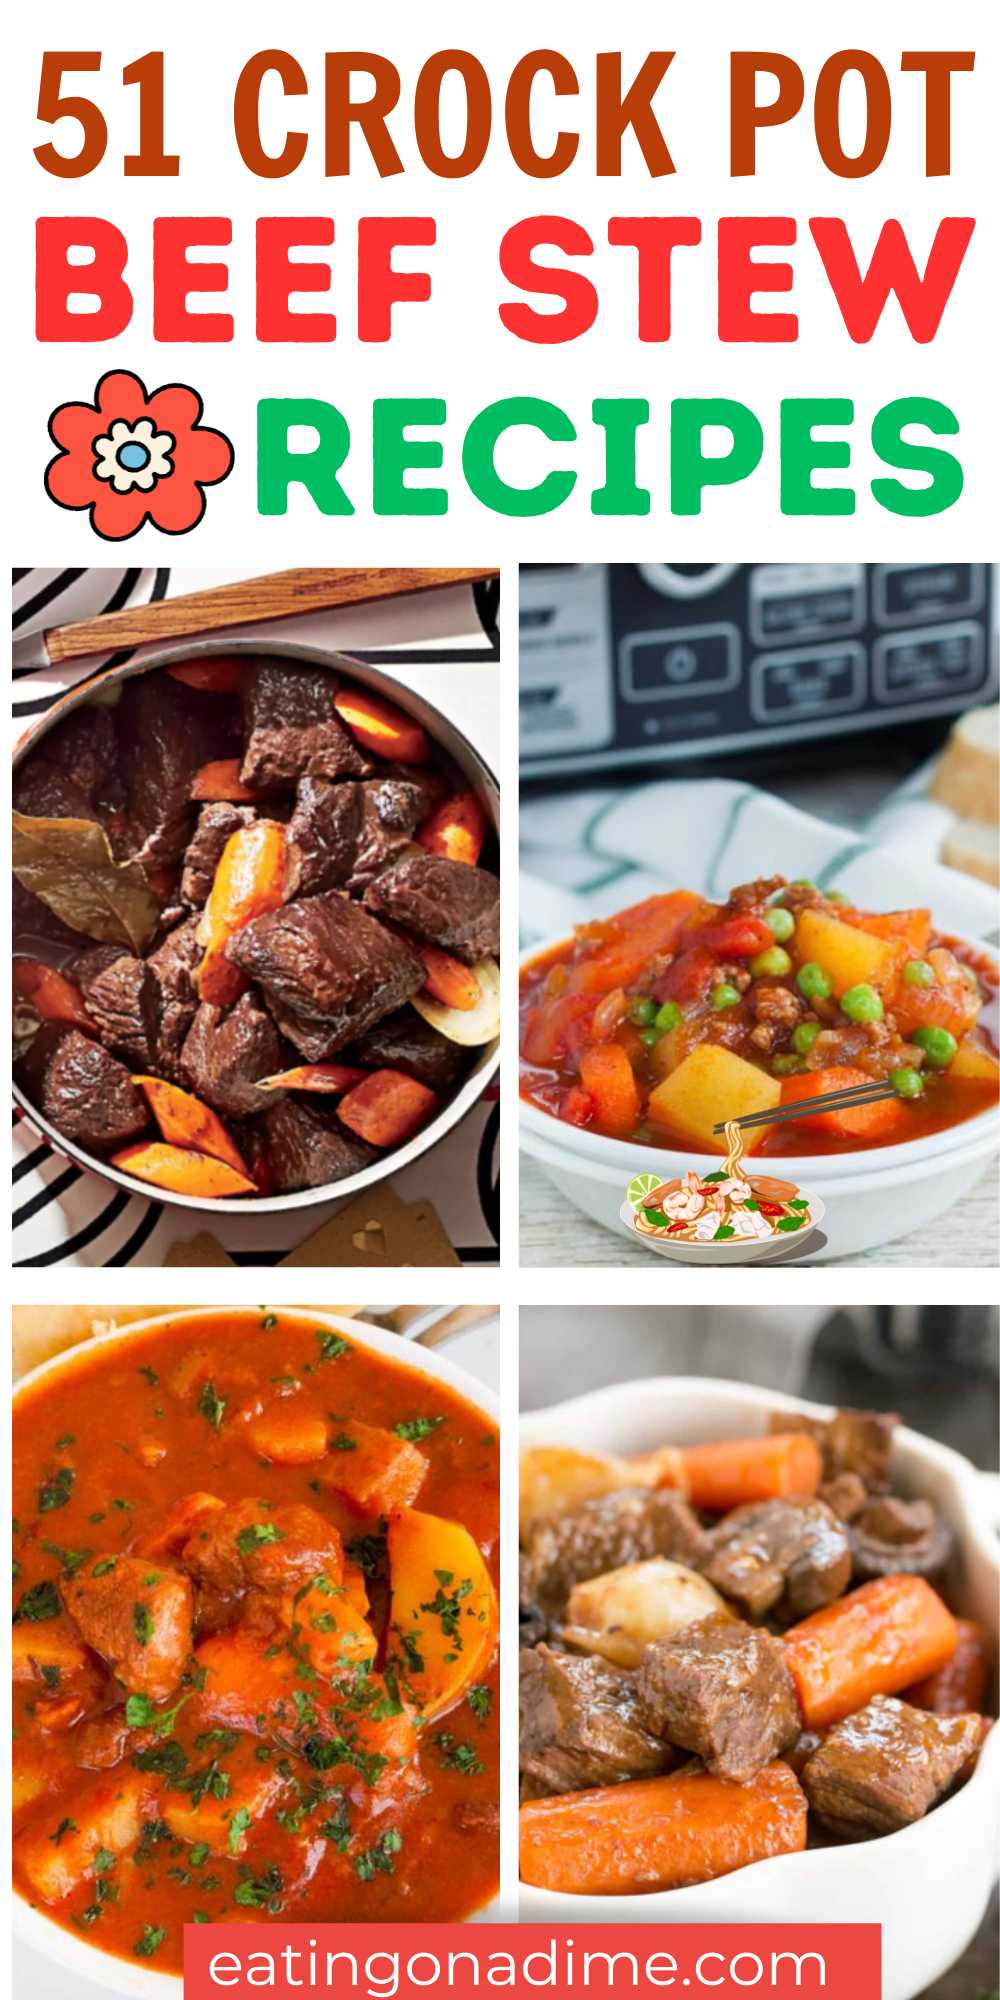 Get ready to tantalize your taste buds and warm your soul with the ultimate comfort food, crockpot beef stew recipes. From tender chunks of beef to hearty veggies, these slow-cooked wonders bring out the flavors like nothing else. #eatingonadime #crockpotbeefstewrecipes #beefstewrecipes